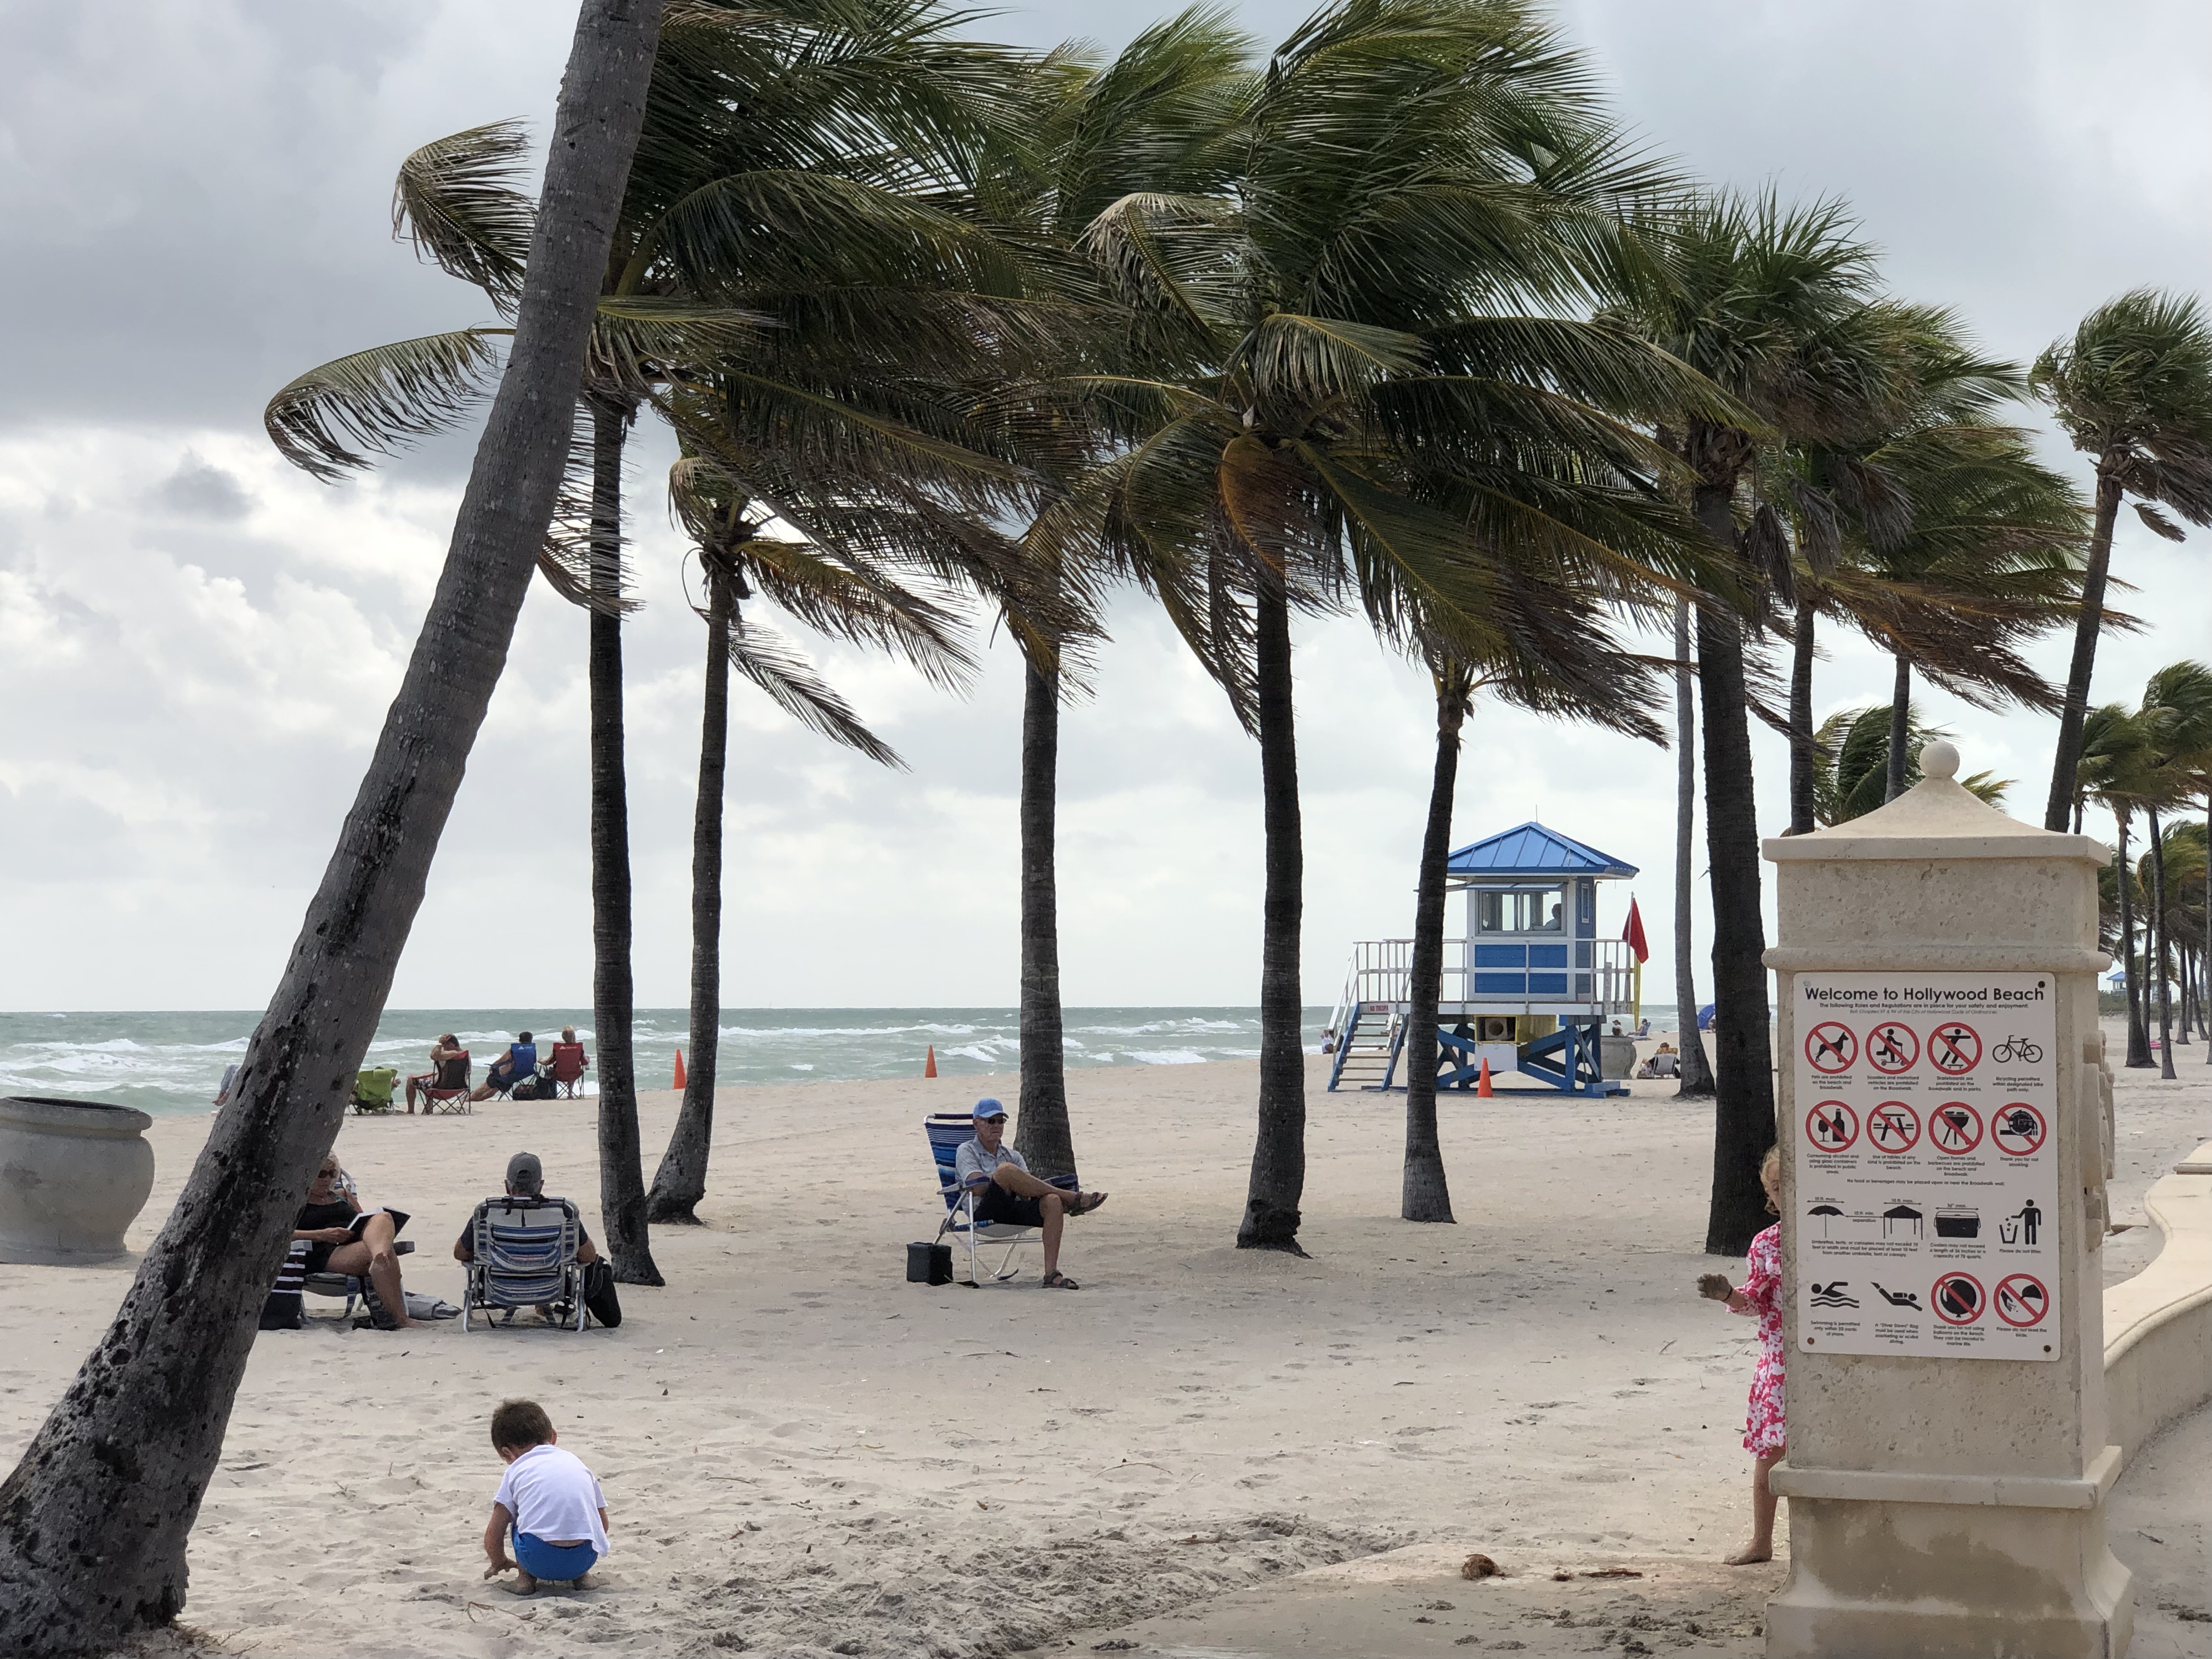 Commission Votes To Ban Low-Riding Banana Peel Bikes, Tents From Hollywood Beach